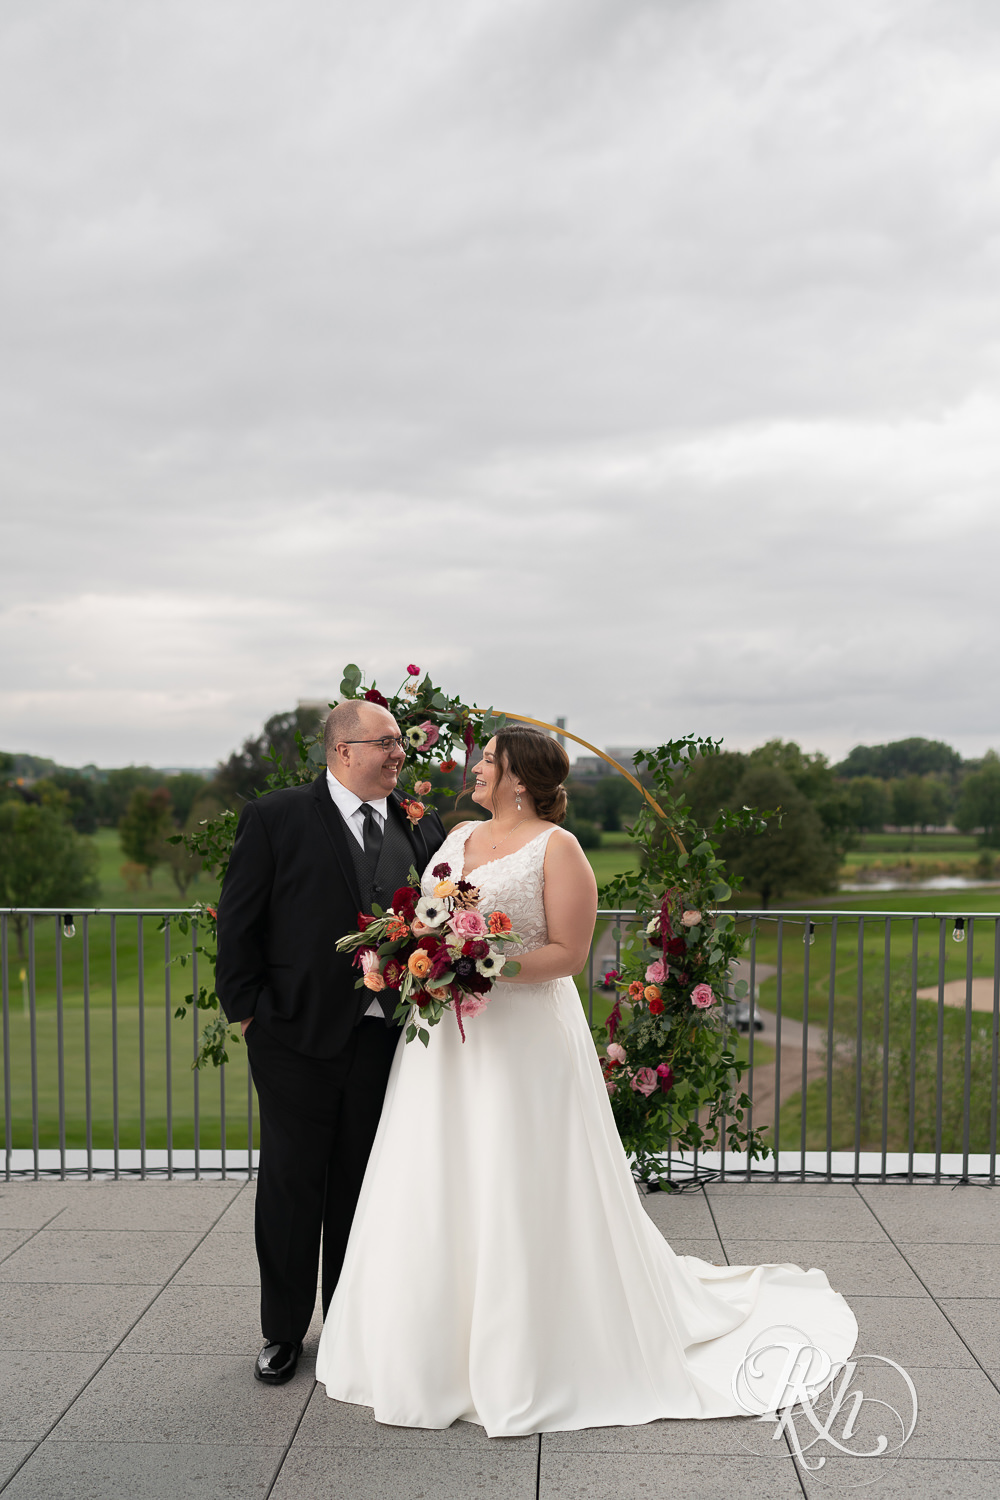 Wedding couple laughing and facing each other at Brookview Golf Course in Golden Valley, Minnesota.